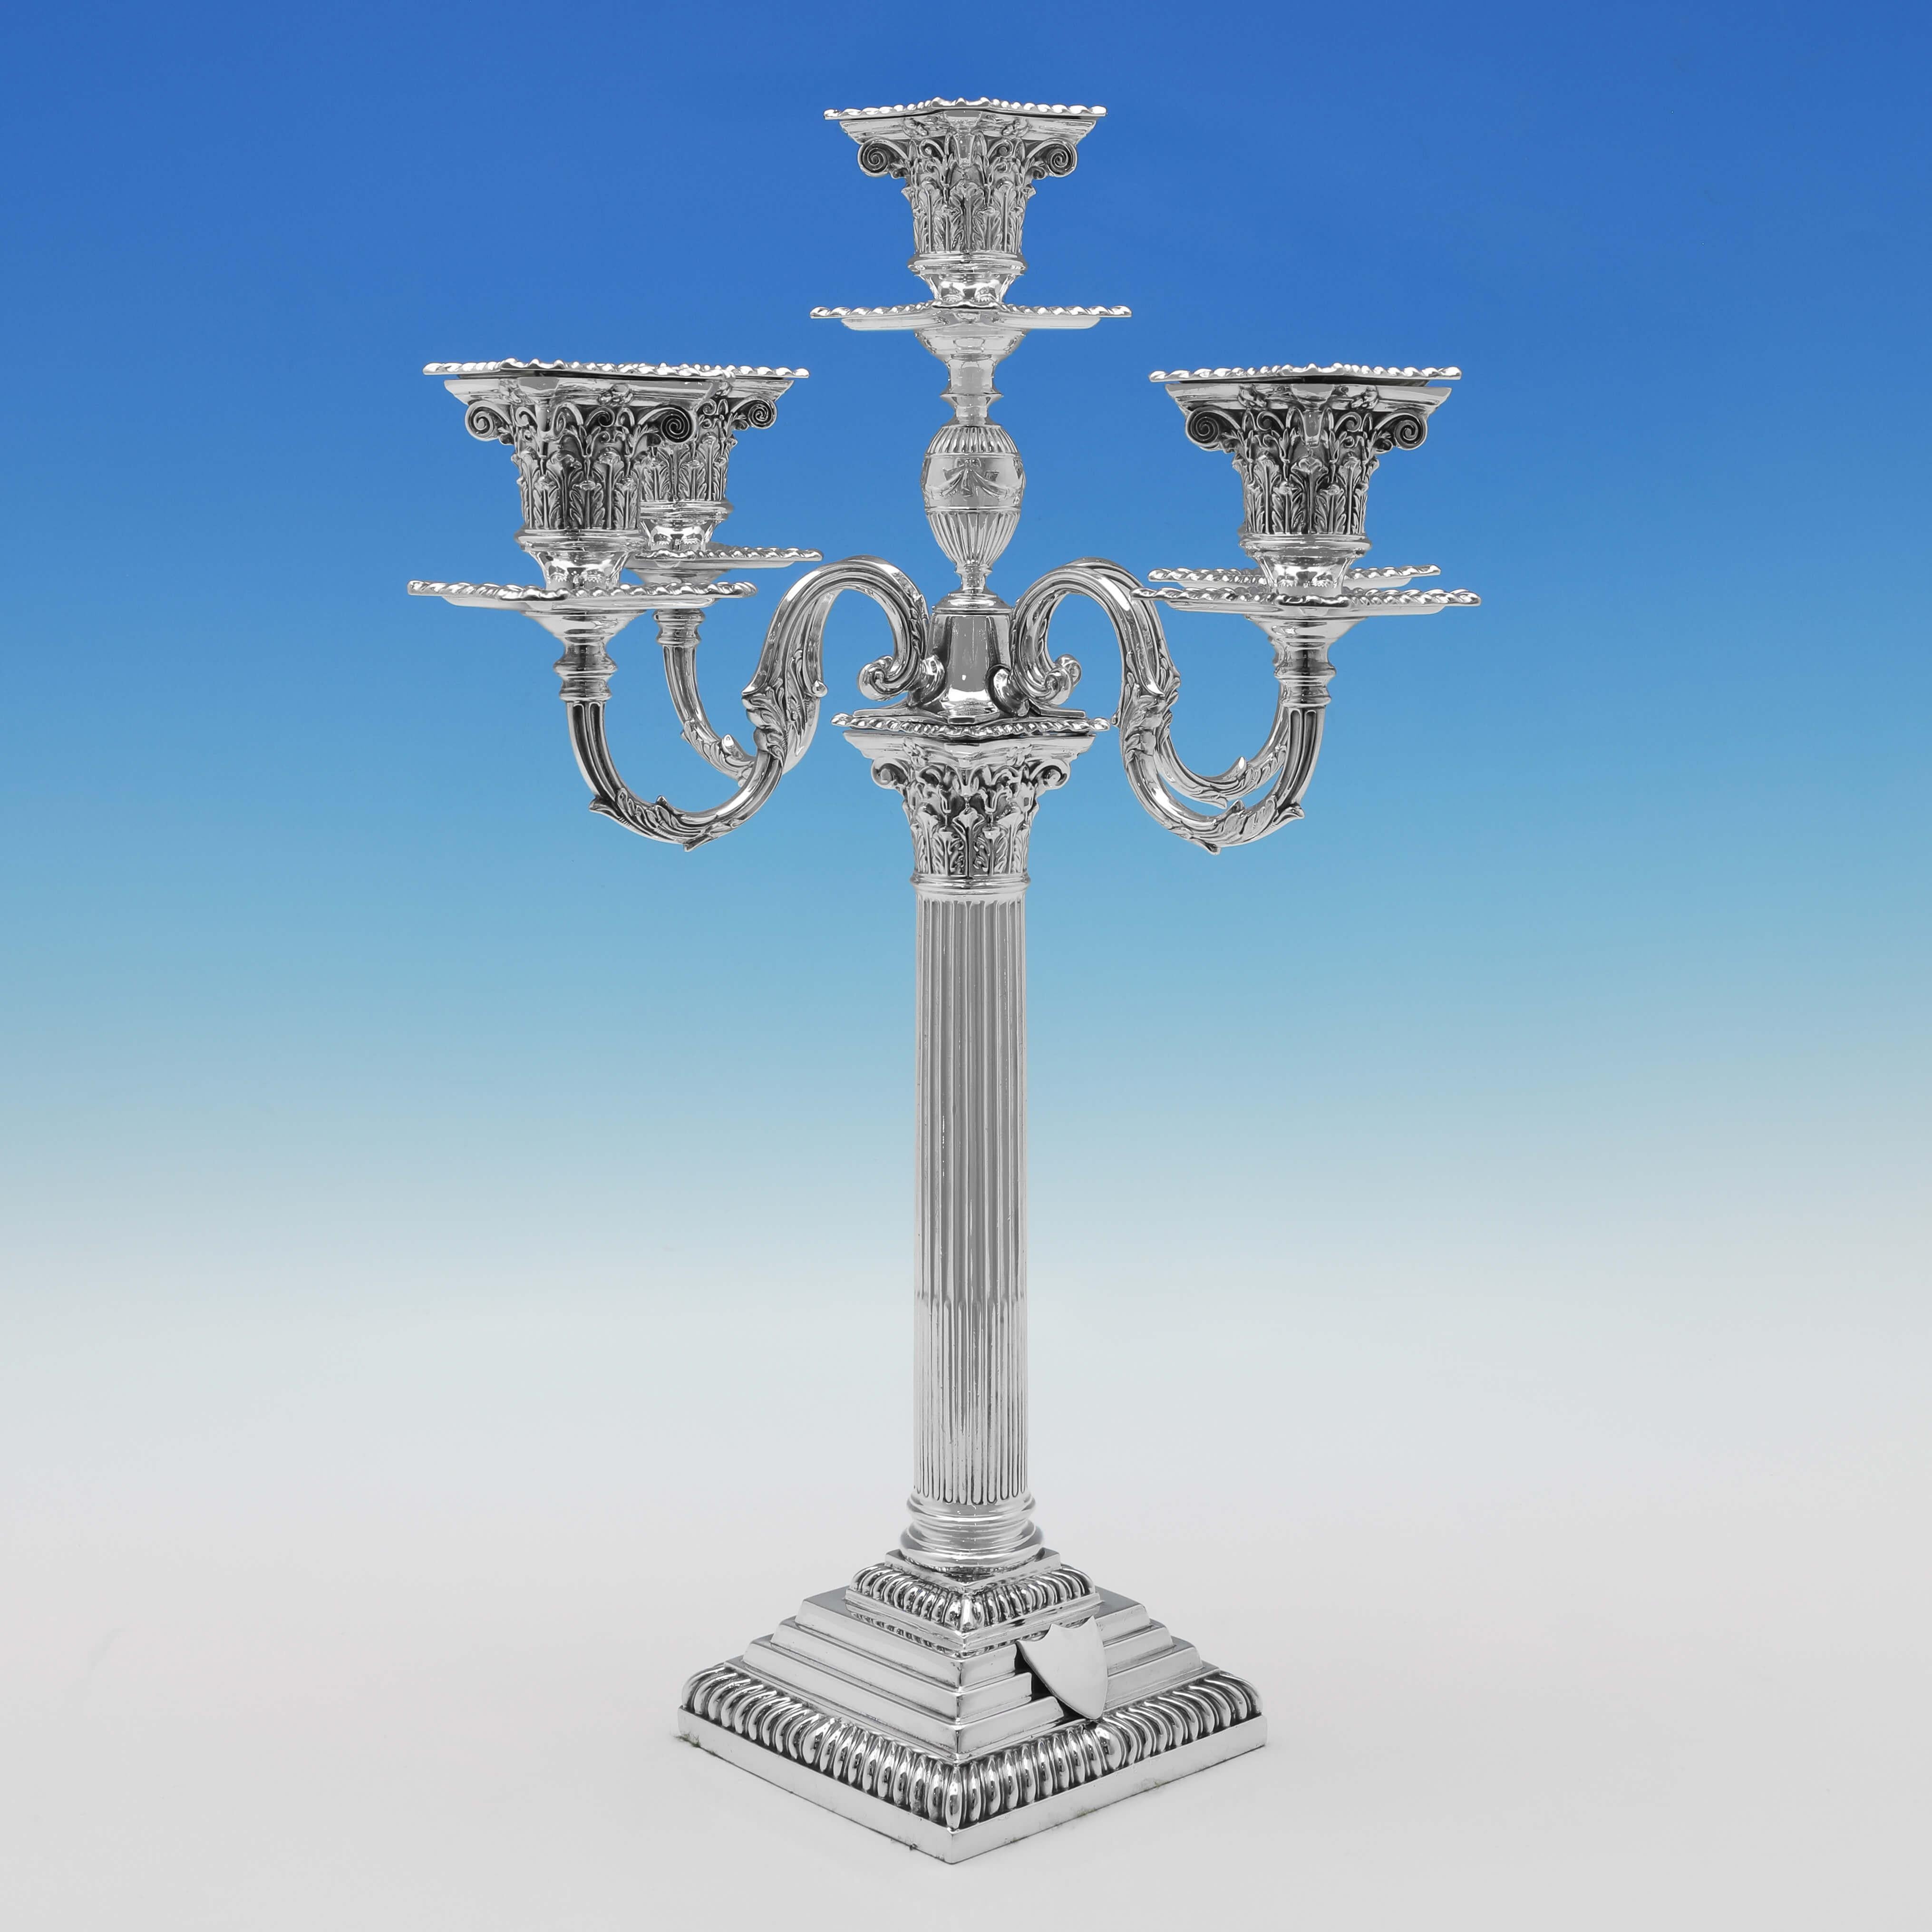 Hallmarked in London in 1896 by Carrington & Co., this attractive pair of Antique Sterling Candelabra, are in the classical Roman 'Corinthian' style, and feature gadroon borders, and applied shields to the bases. The candelabra are in the 5 light